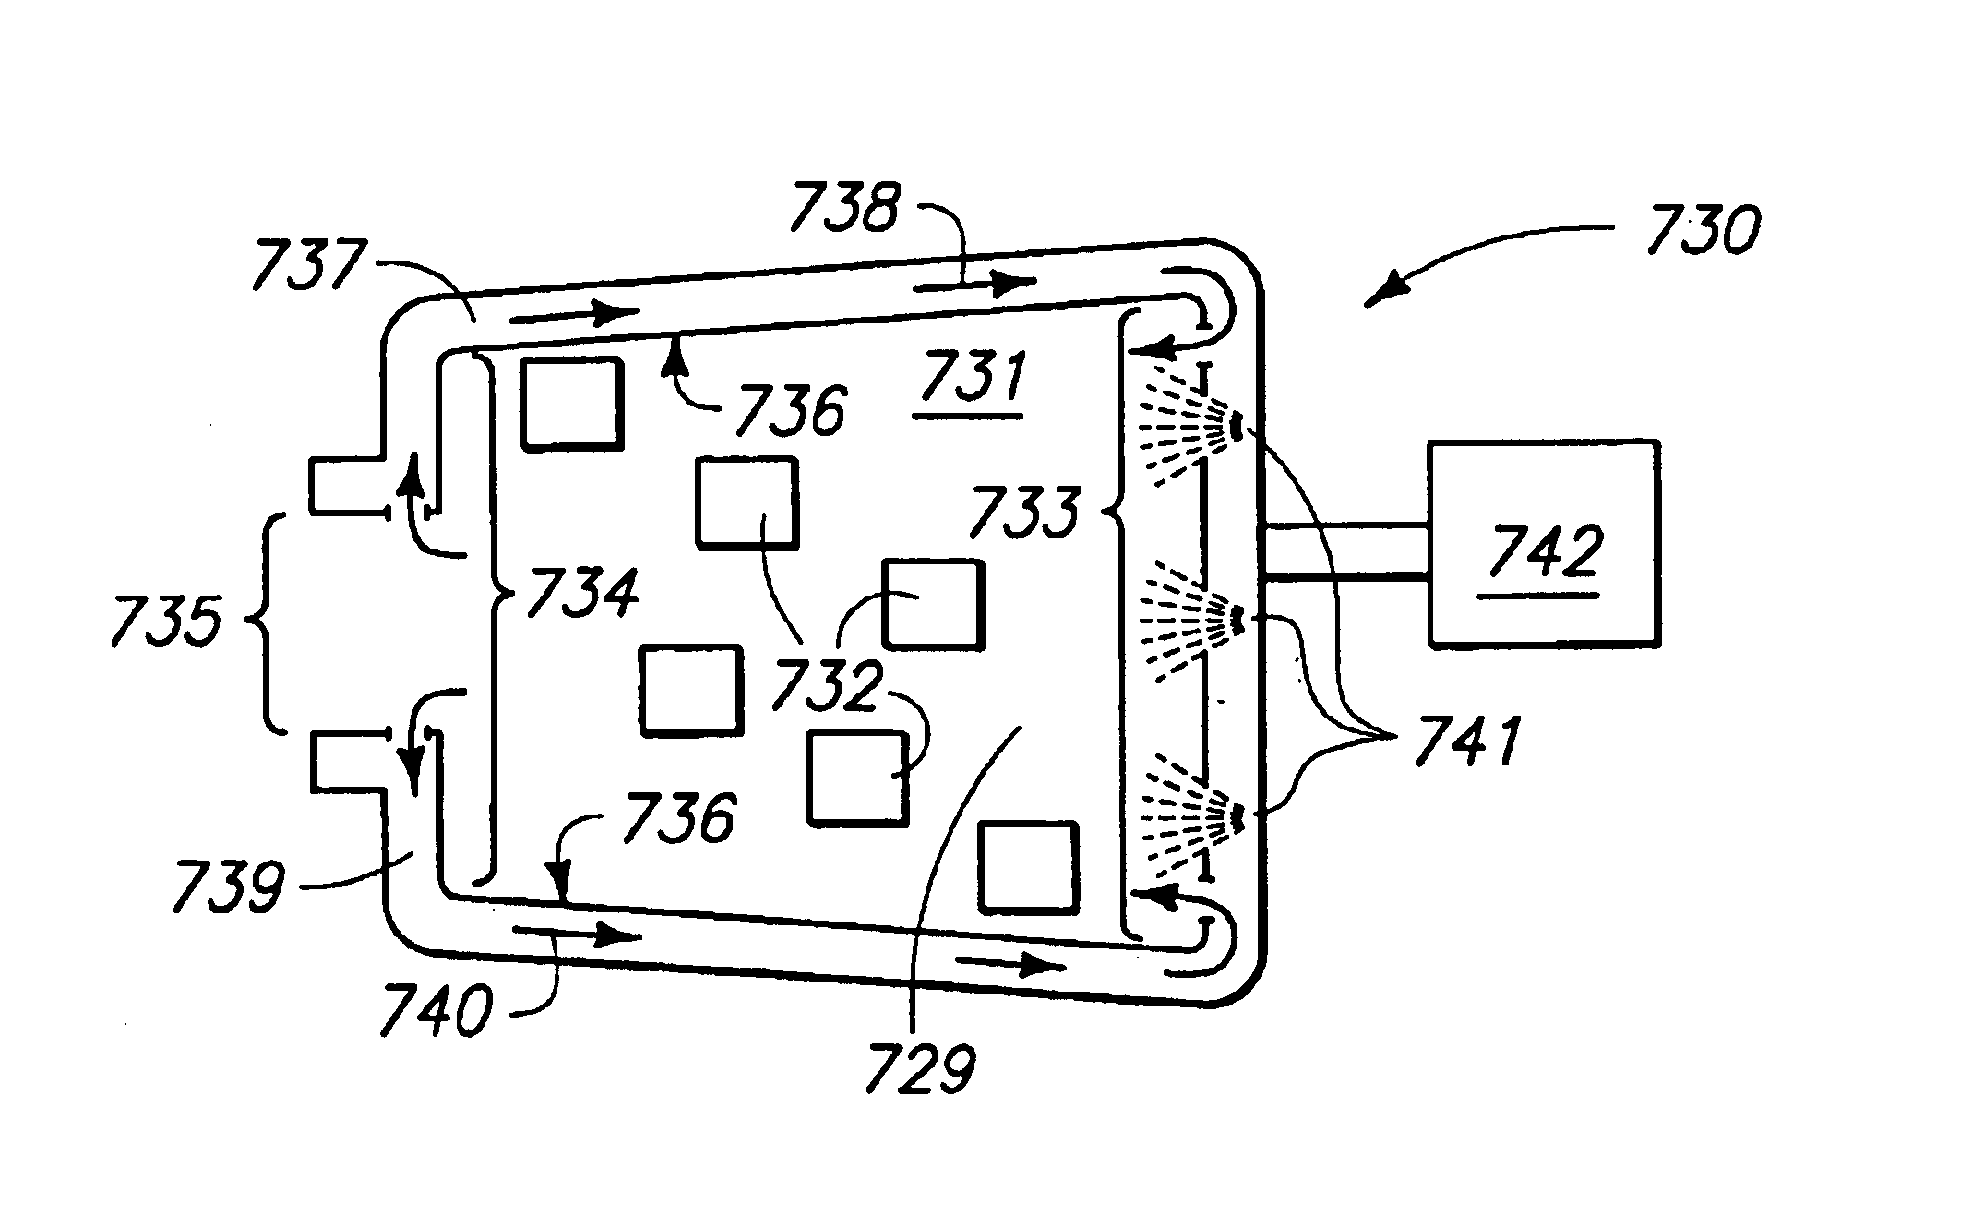 Spray cooling system for transverse thin-film evaporative spray cooling